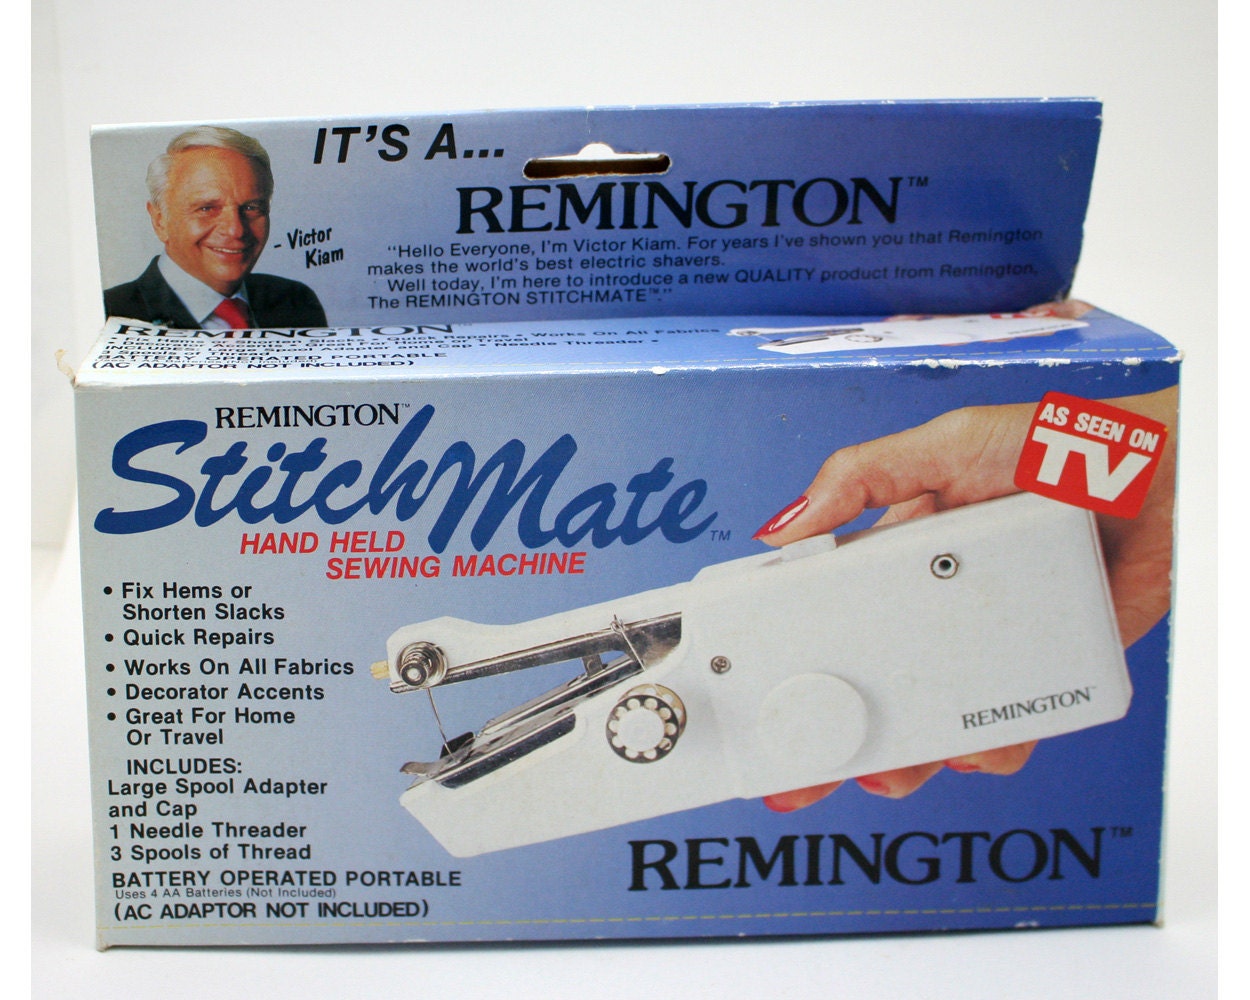 Vintage Stitchmate by Remington Hand Held Sewing Machine Portable